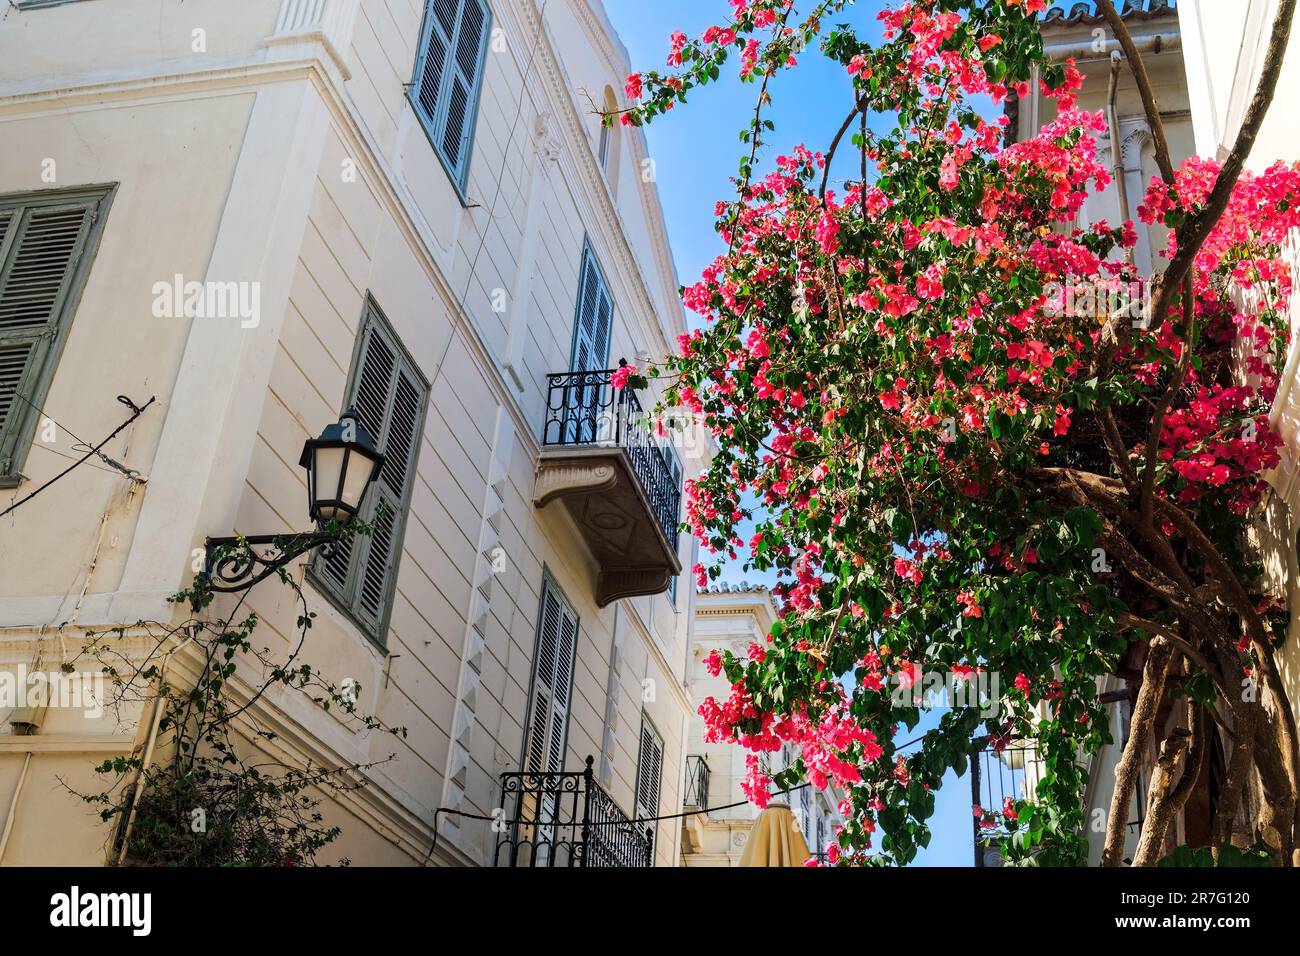 Bougainvillea ornamental bush with vivid color flowers before traditional houses in Nafplio, Greece. Stock Photo